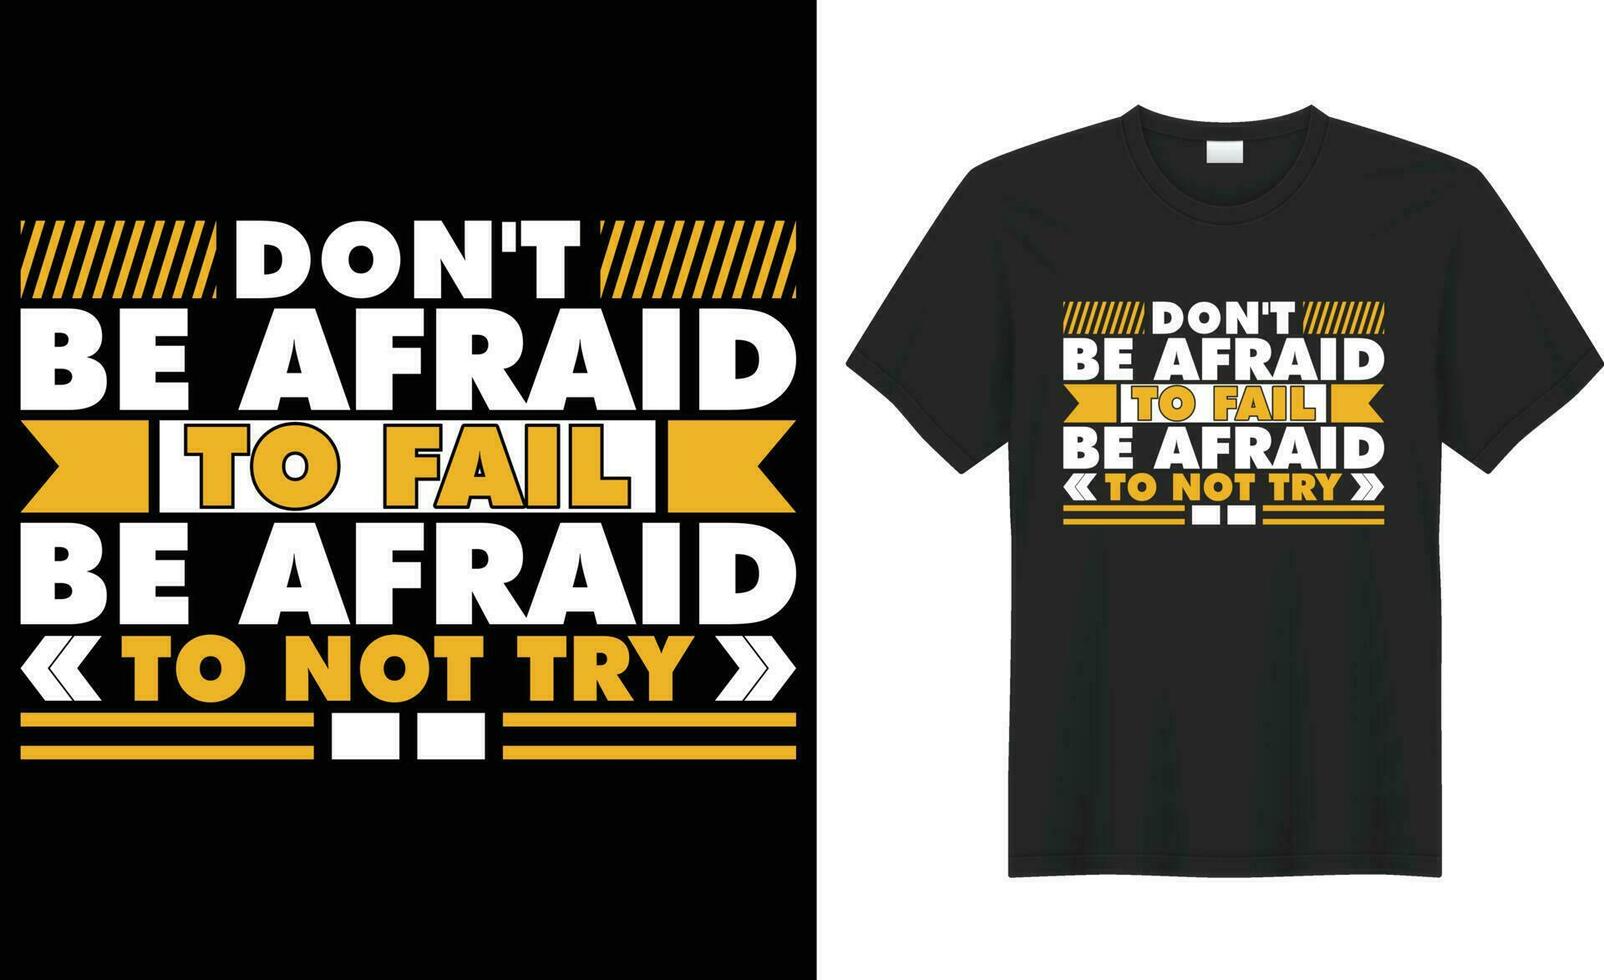 Don't be afraid to fail be afraid to not try typography vector t-shirt Design. Perfect for print items and bag, poster, template. Handwritten vector illustration. Isolated on black background.